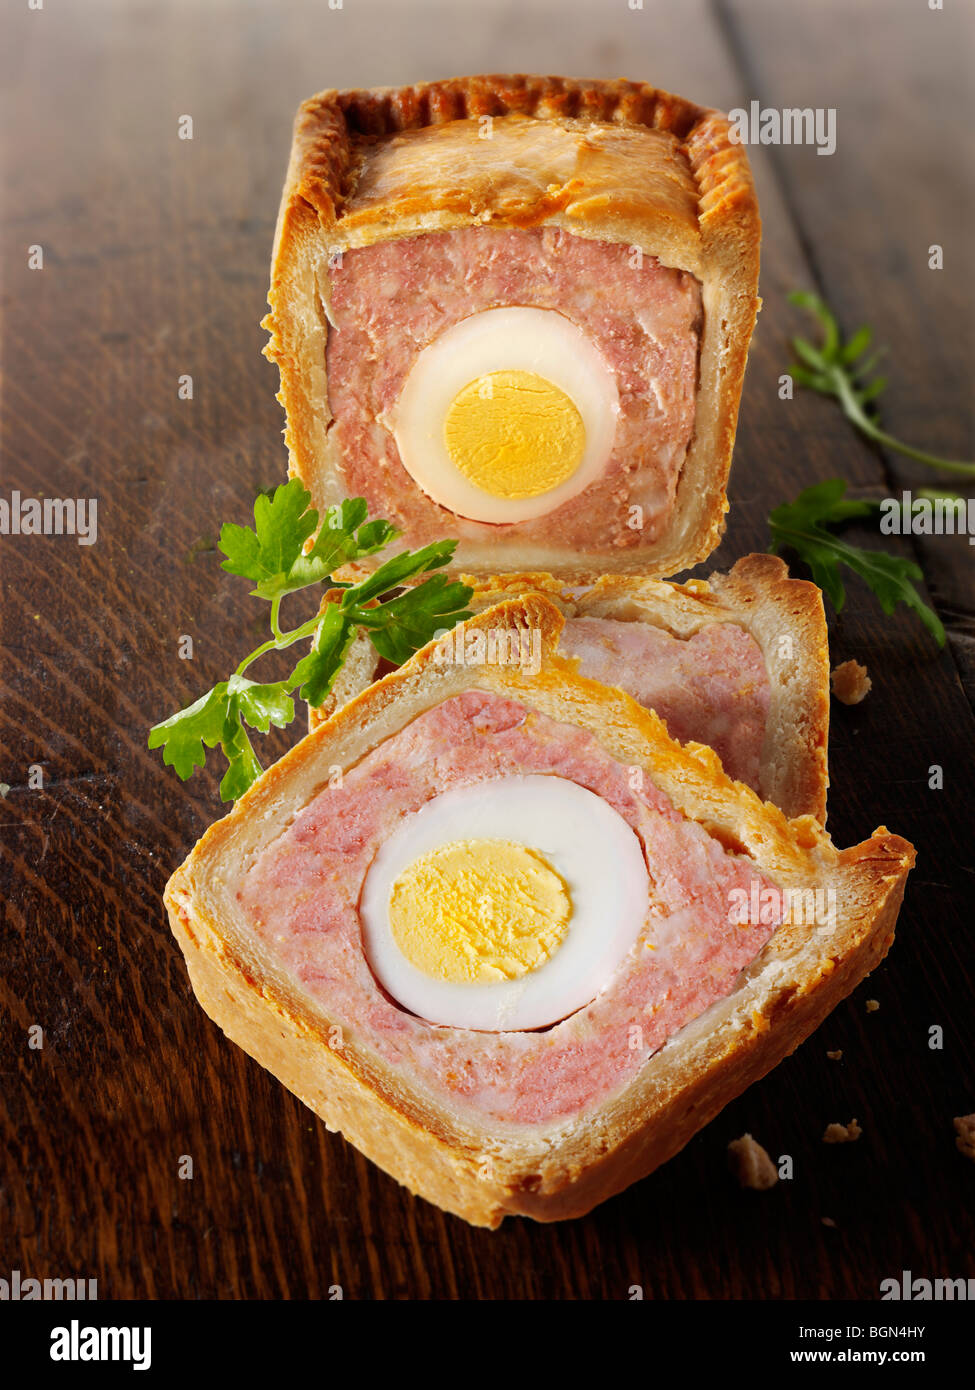 Traditional British pork pastry pie with an egg running through it ready to eat Stock Photo